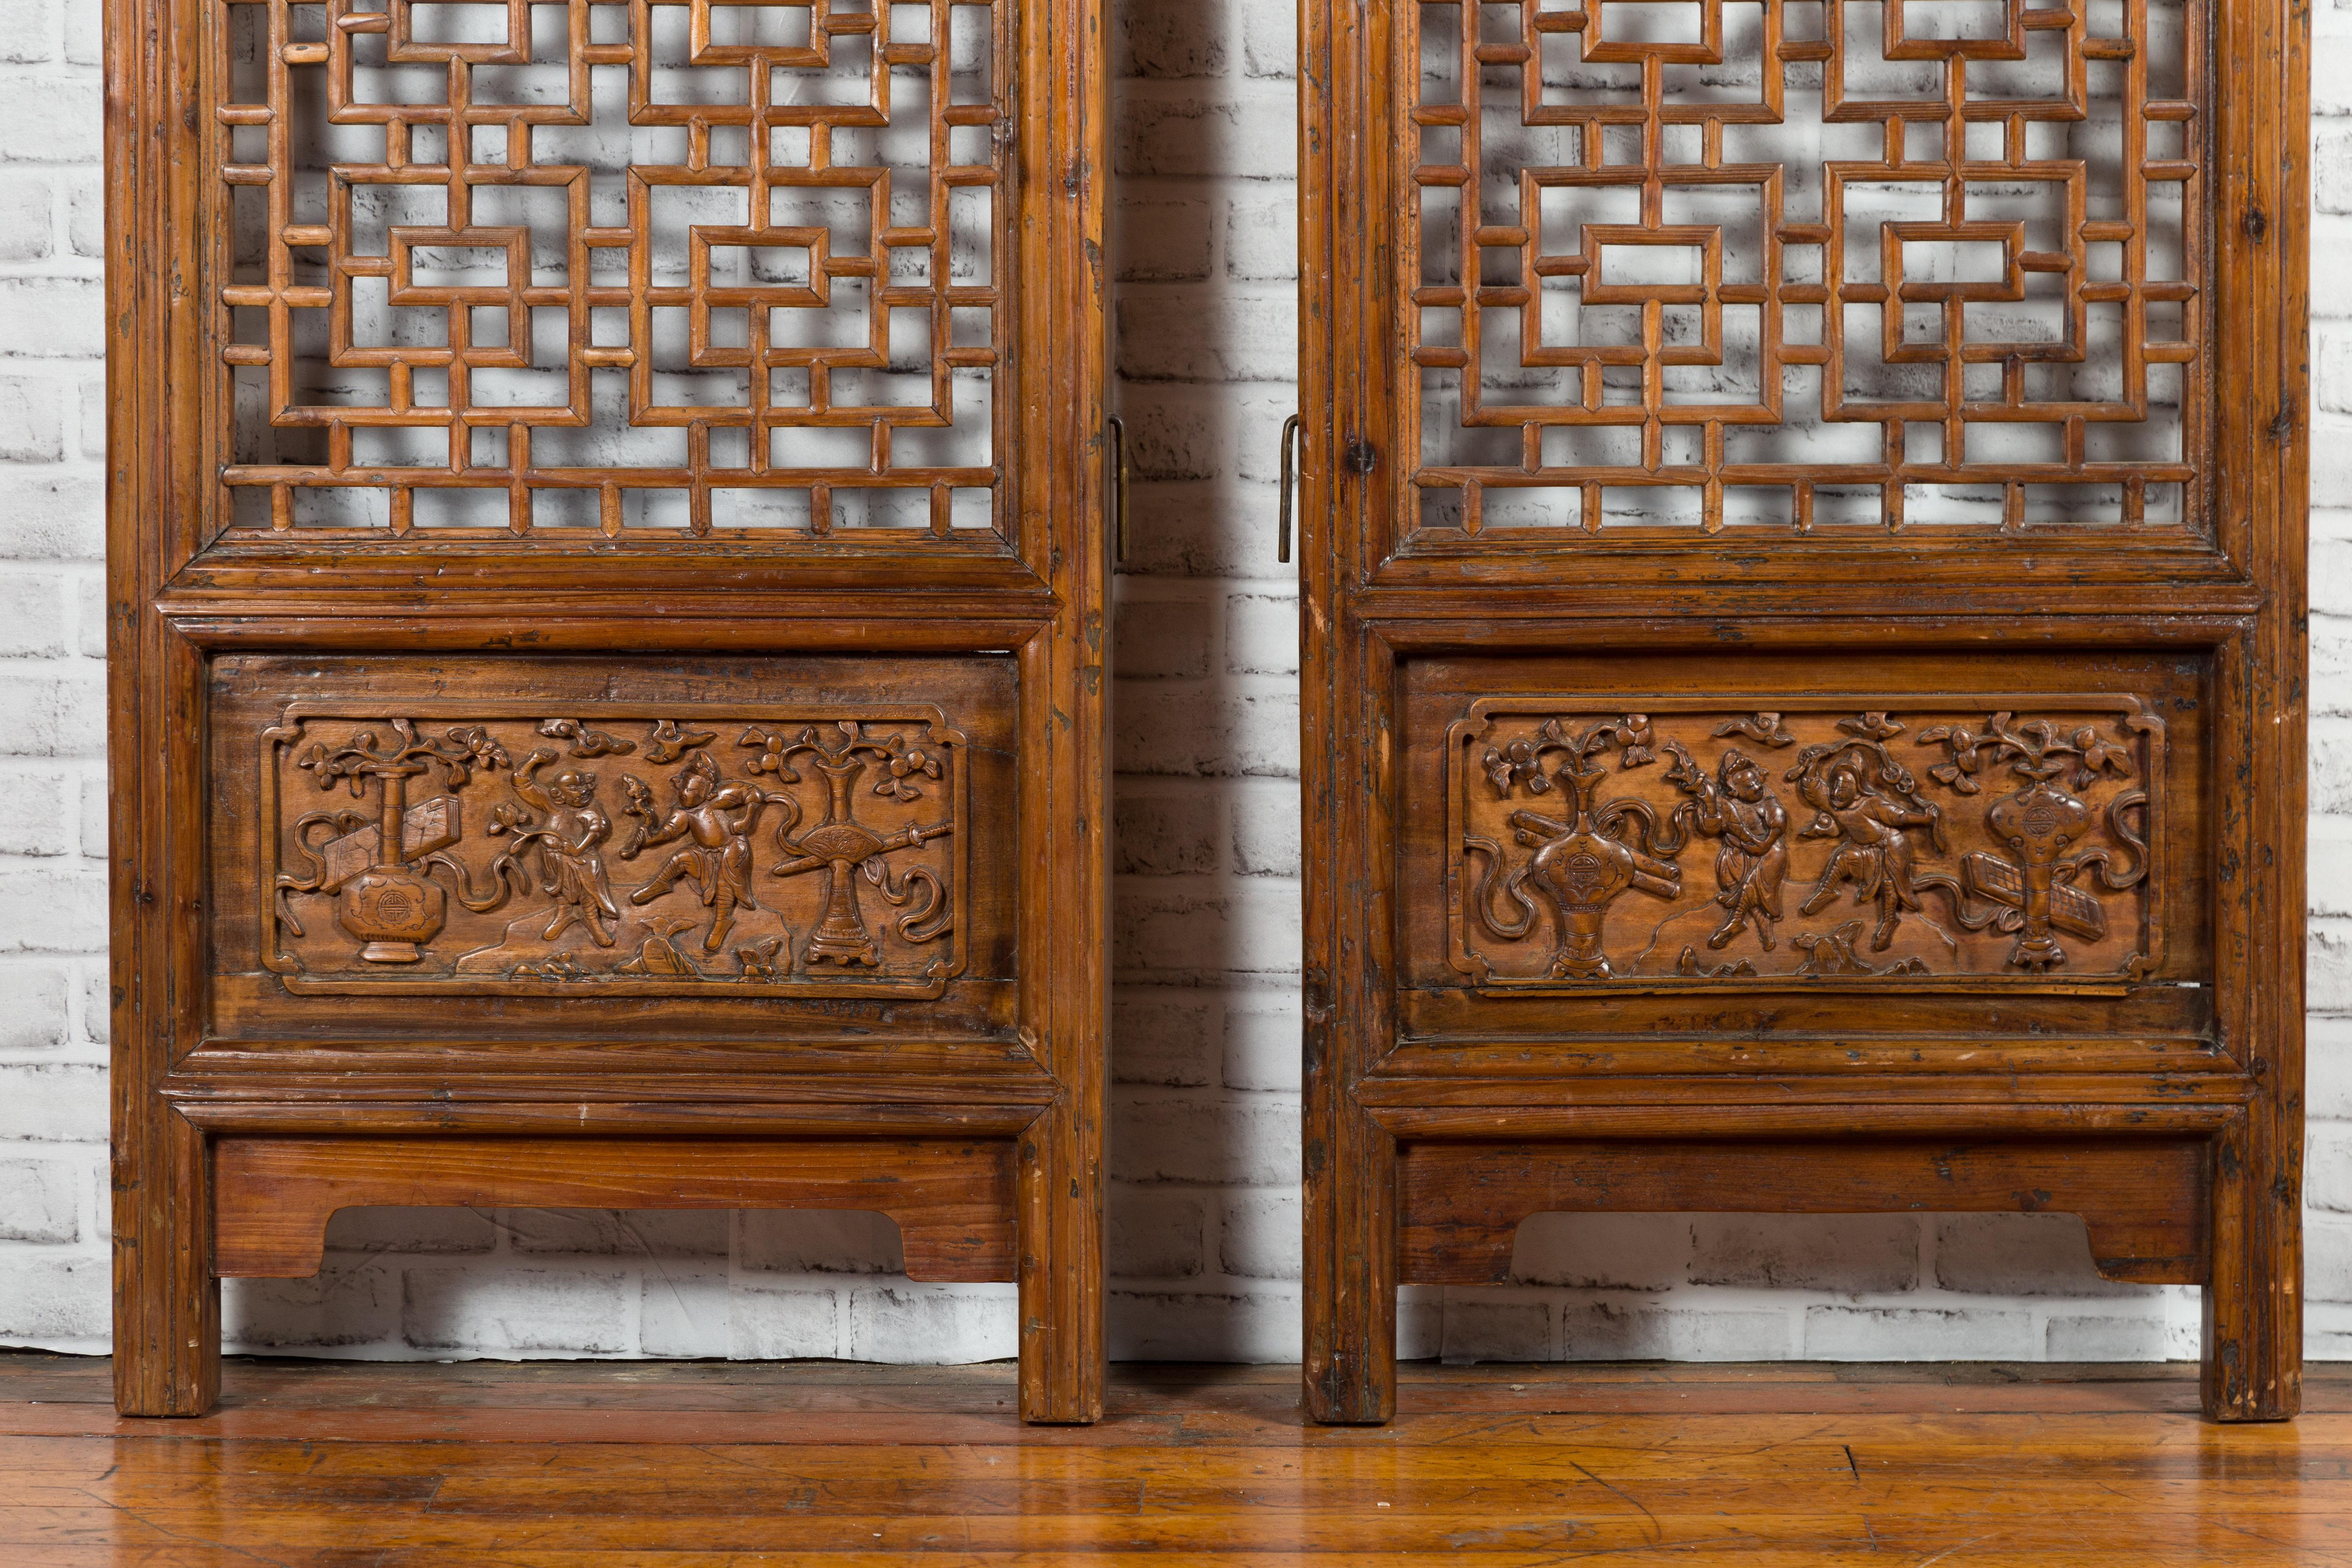 Pair of Chinese 19th Century Screens with Fretwork and Low-Relief Carved Panels 2